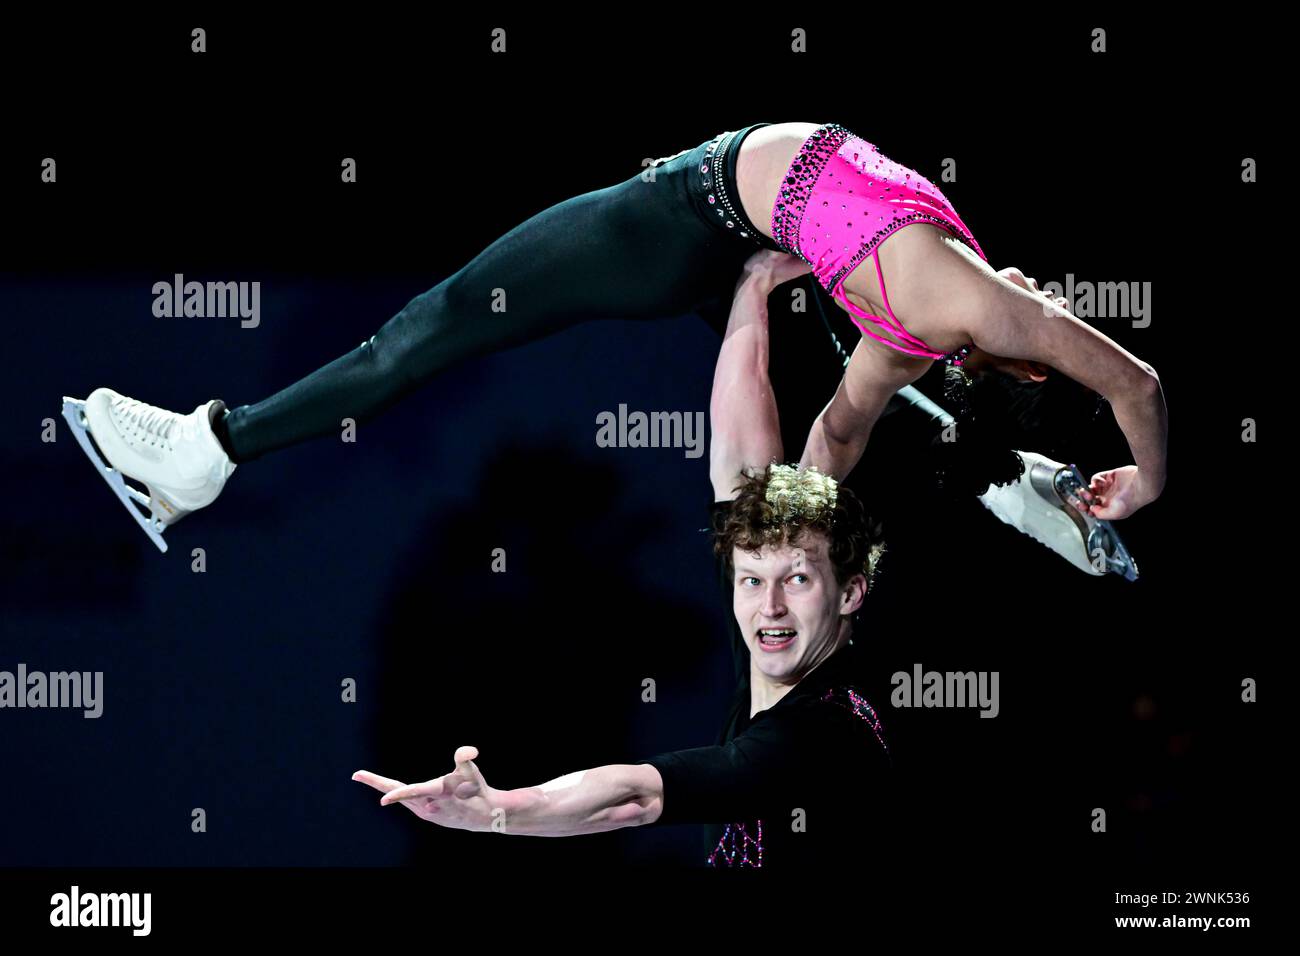 Naomi WILLIAMS & Lachlan LEWER (USA), during Exhibition Gala, at the